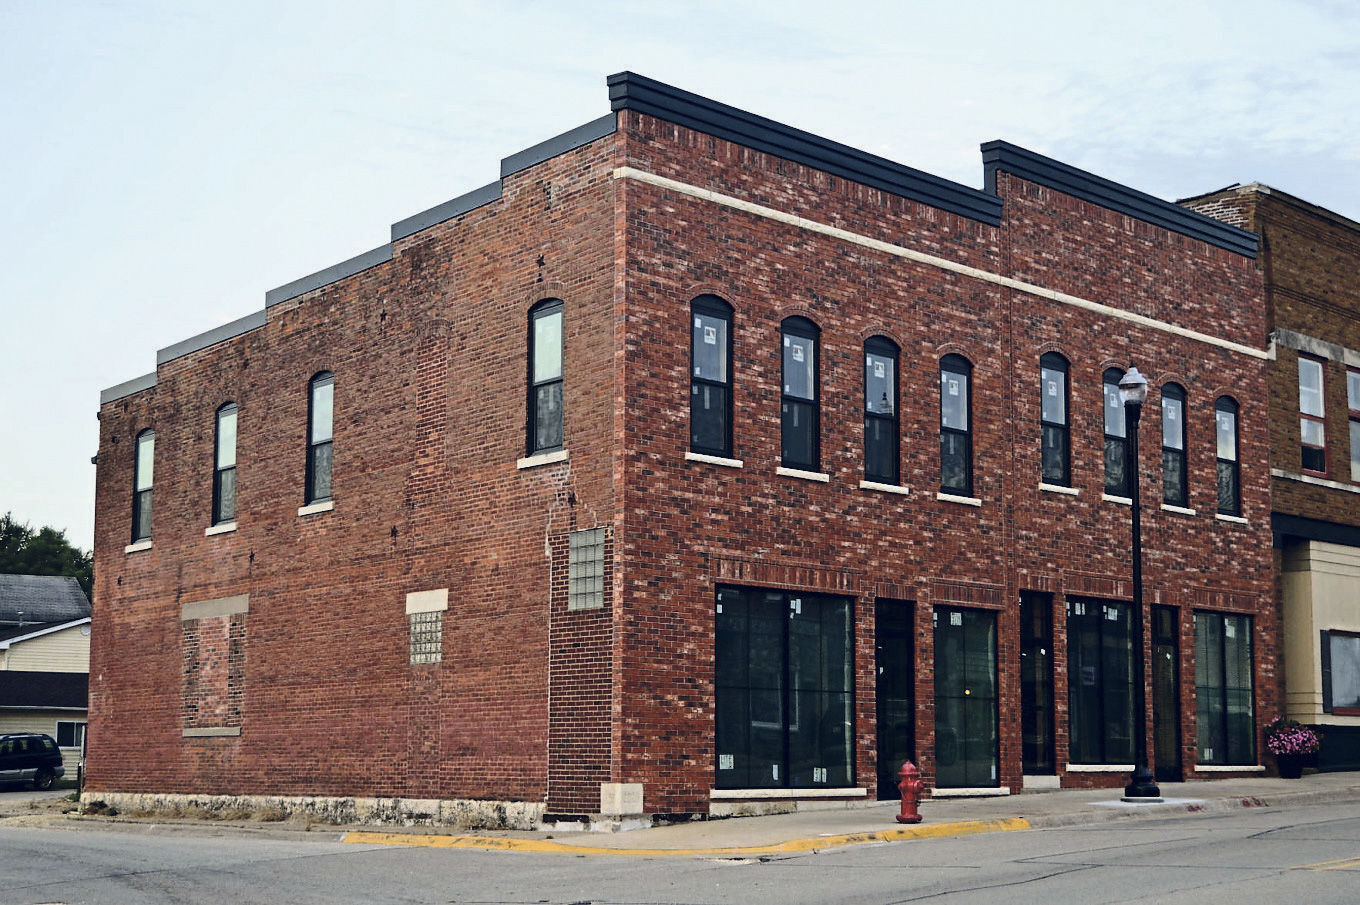 Textile Brewing Co. has announced plans to open a taproom in the former Corner Tap building at 201 First Ave. W in Cascade, Iowa. PHOTO CREDIT: Cascade Pioneer